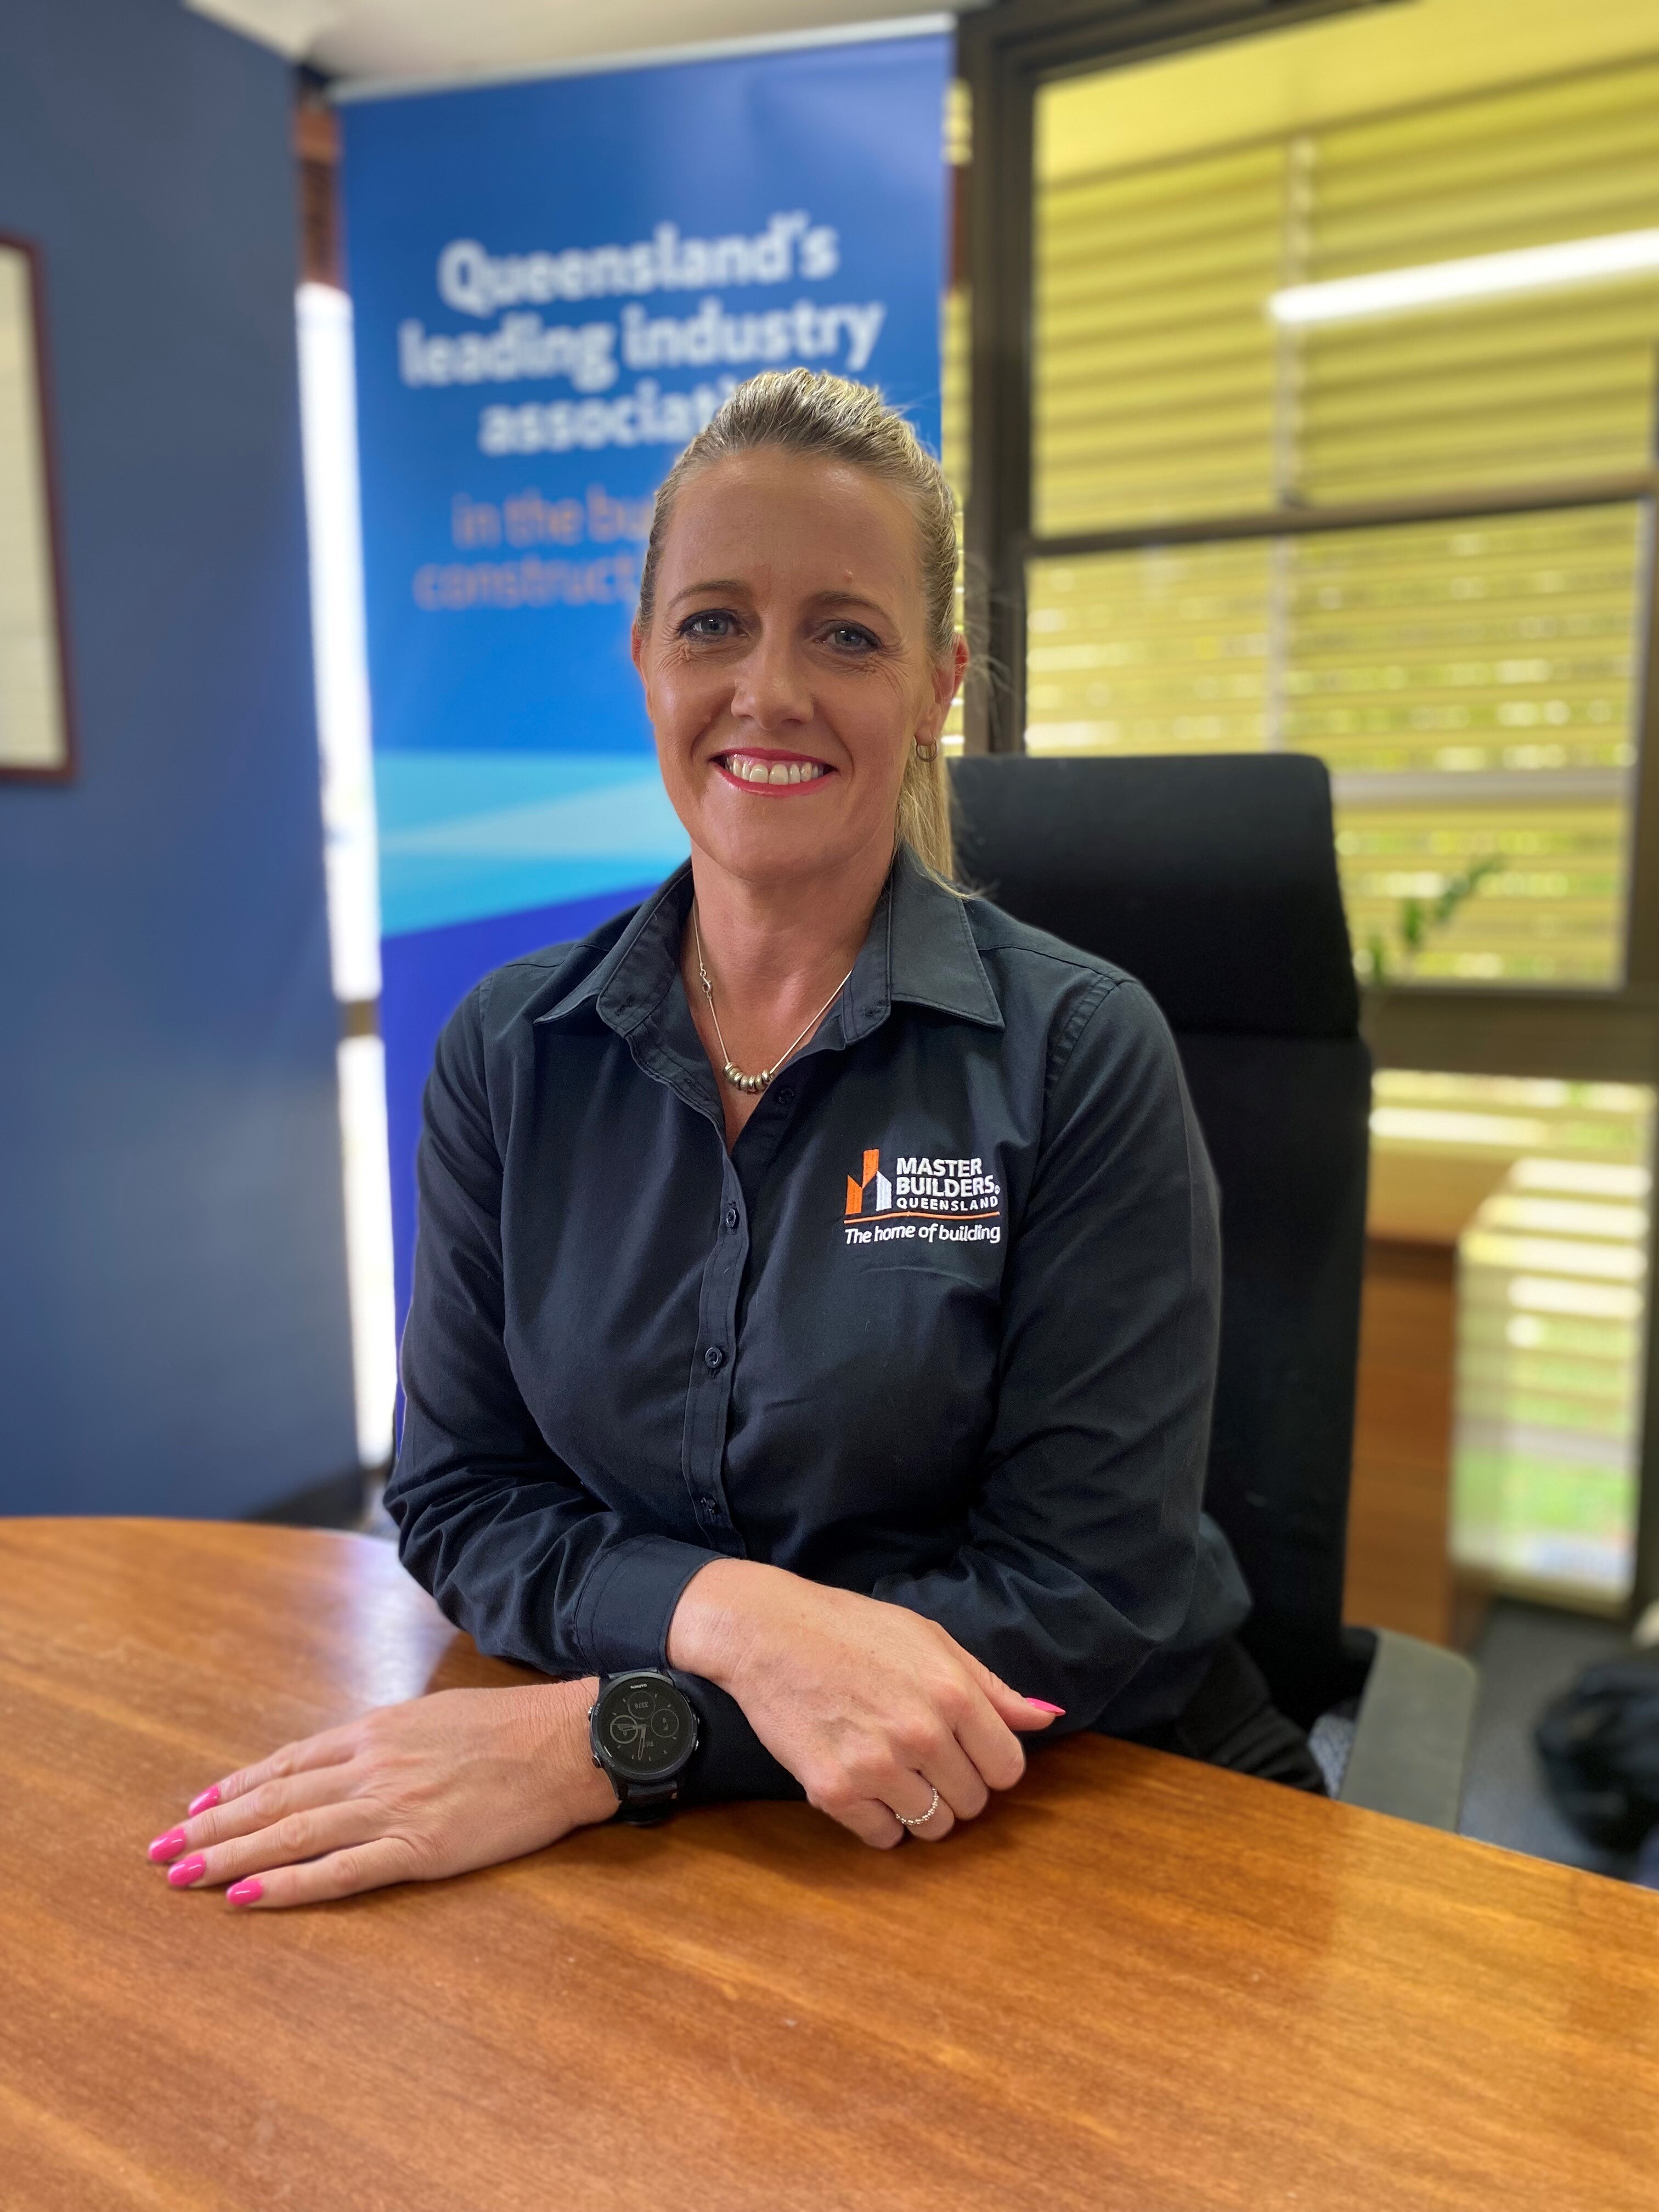 Central Queensland Master Builders manager Michelle Traill